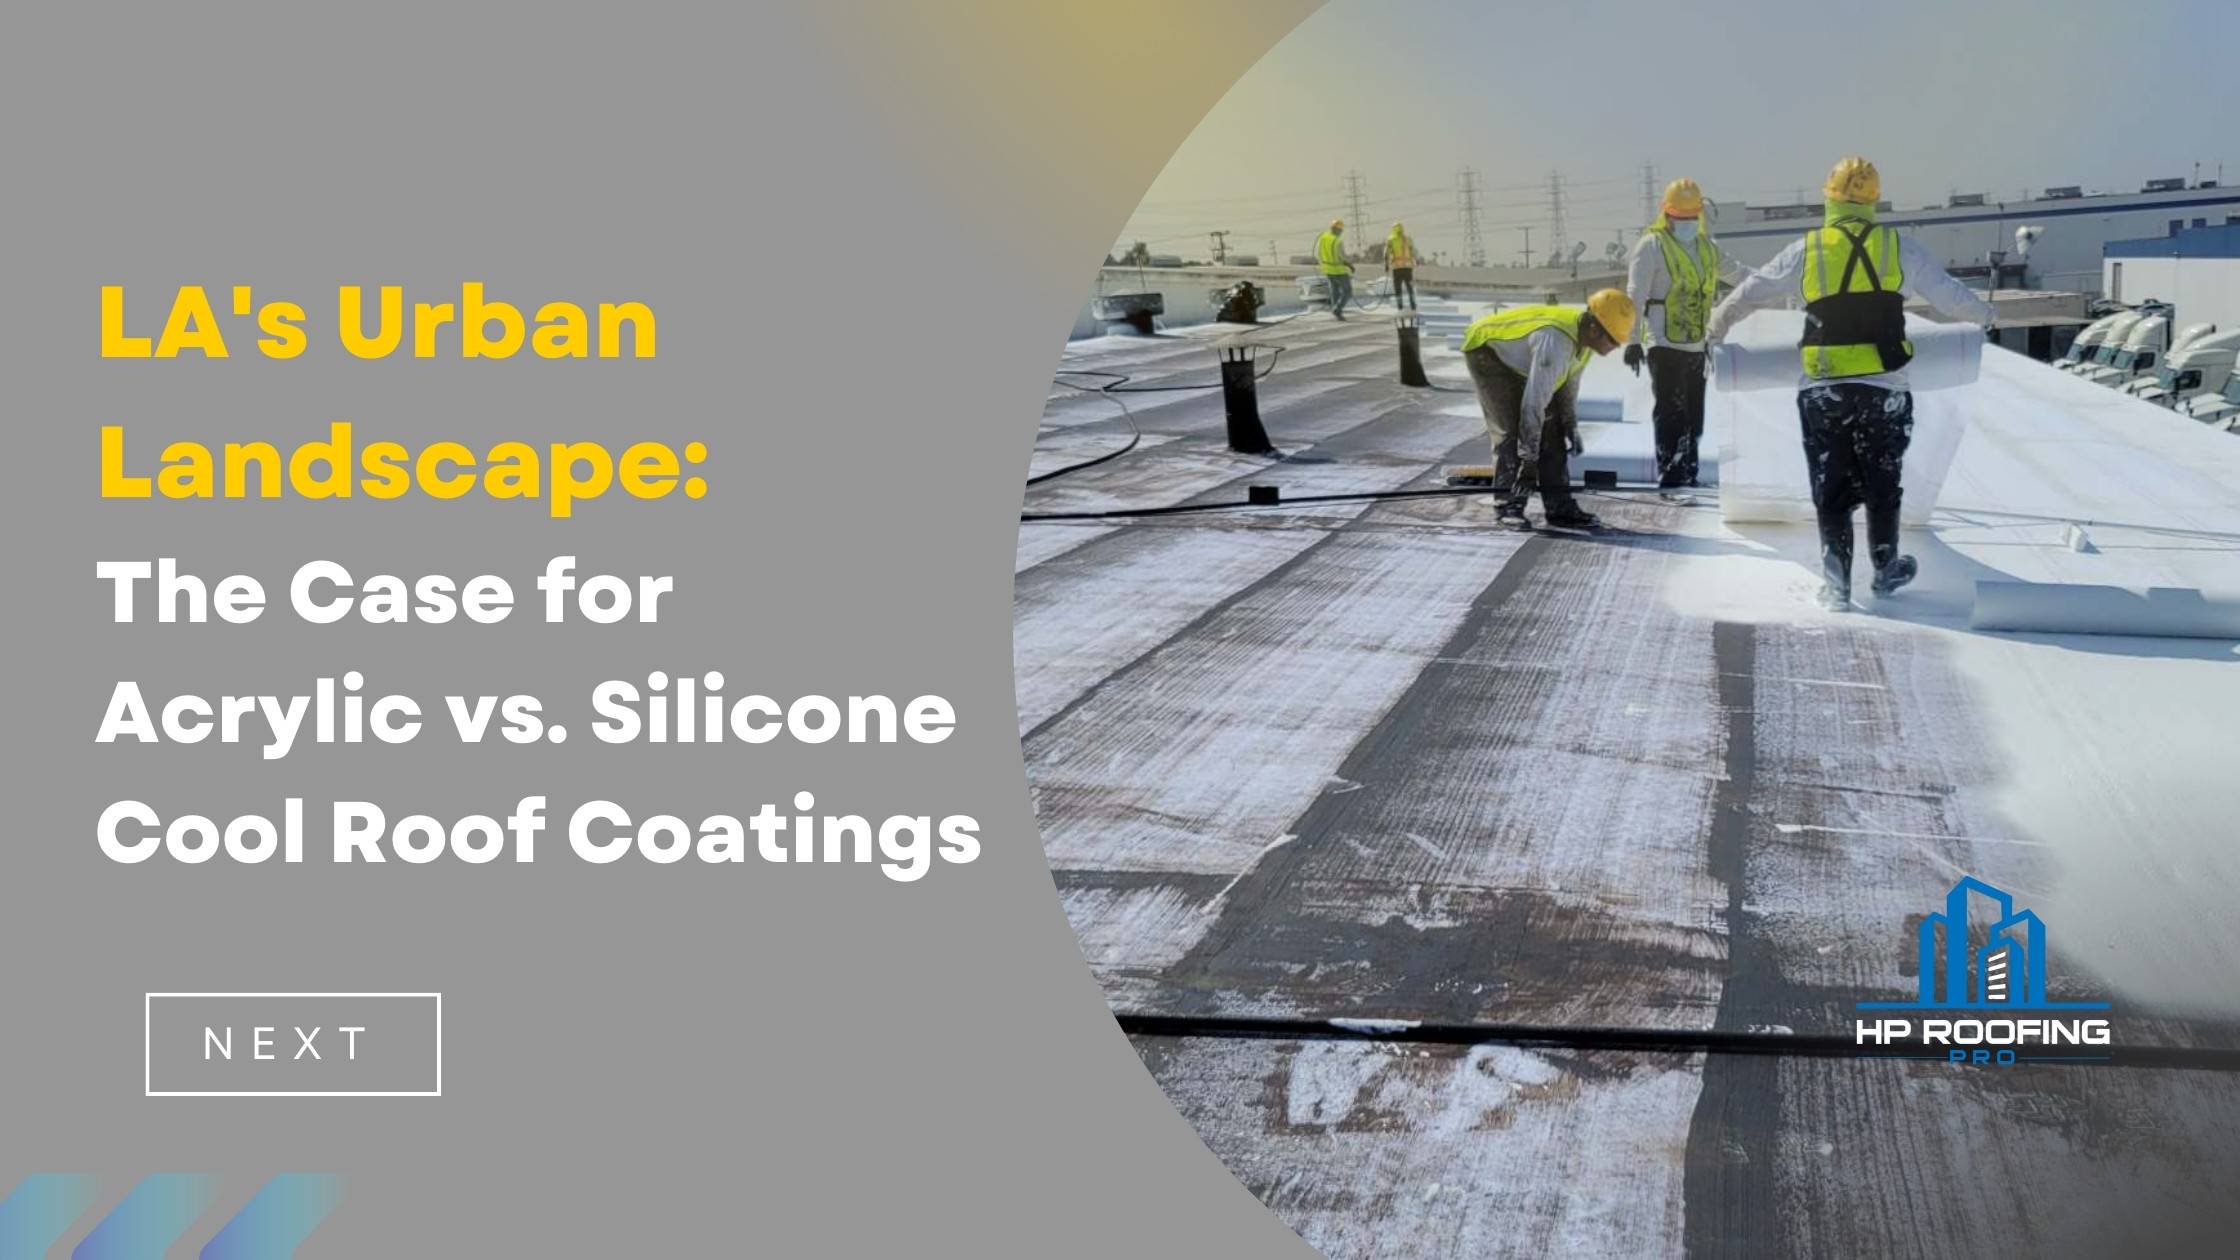 LA’s Urban Landscape: The Case for Acrylic vs. Silicone Cool Roof Coatings